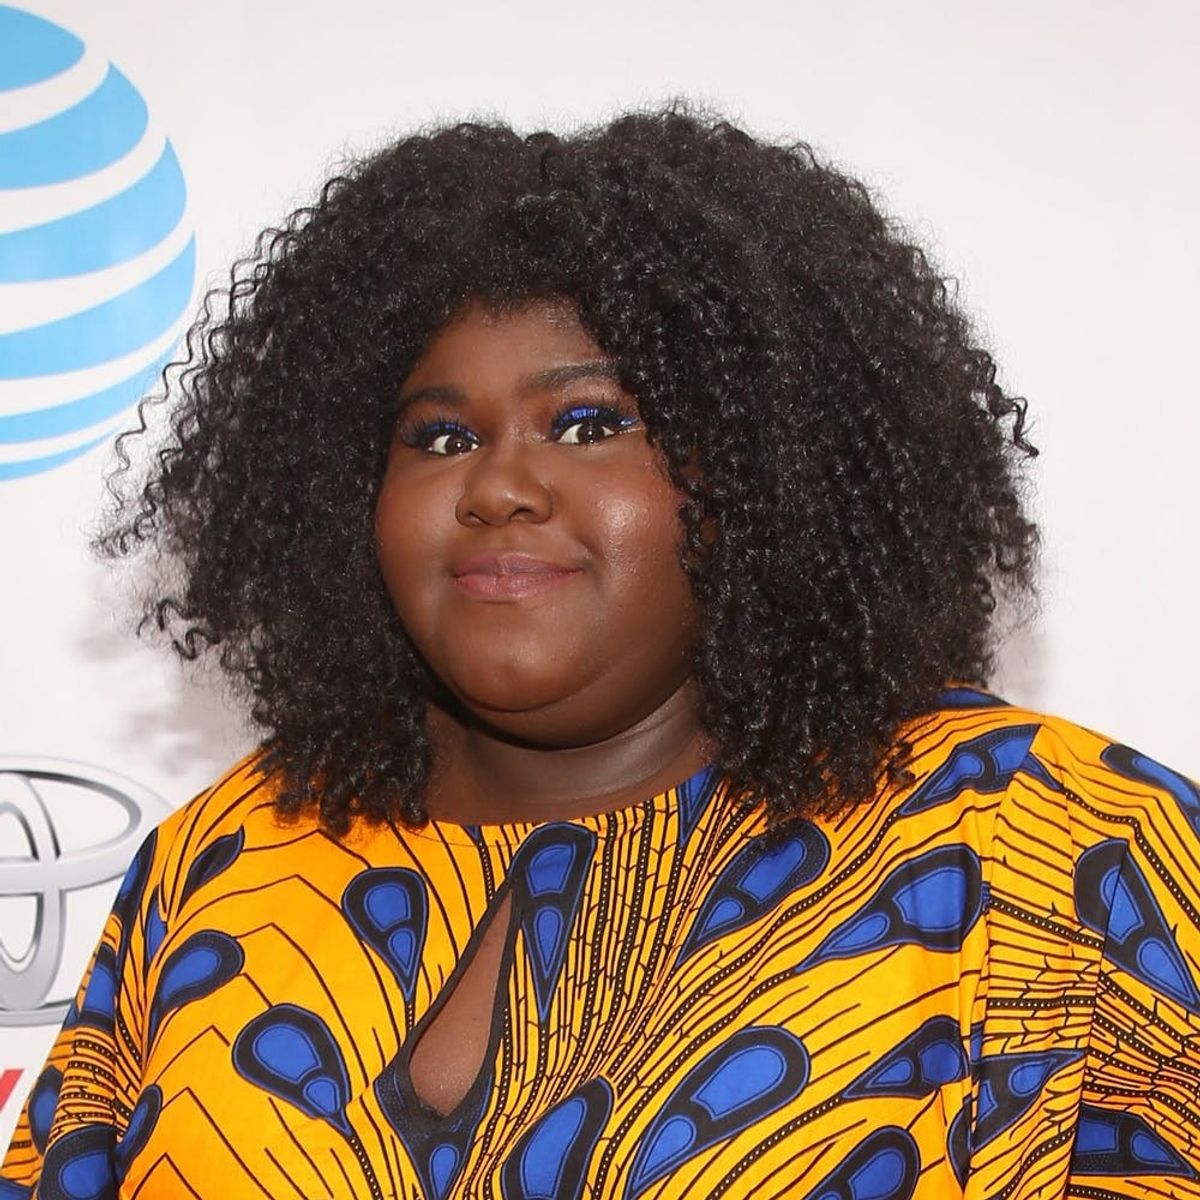 Chanel Is Apologizing to Actress Gabourey Sidibe for Discrimination in Its Stores